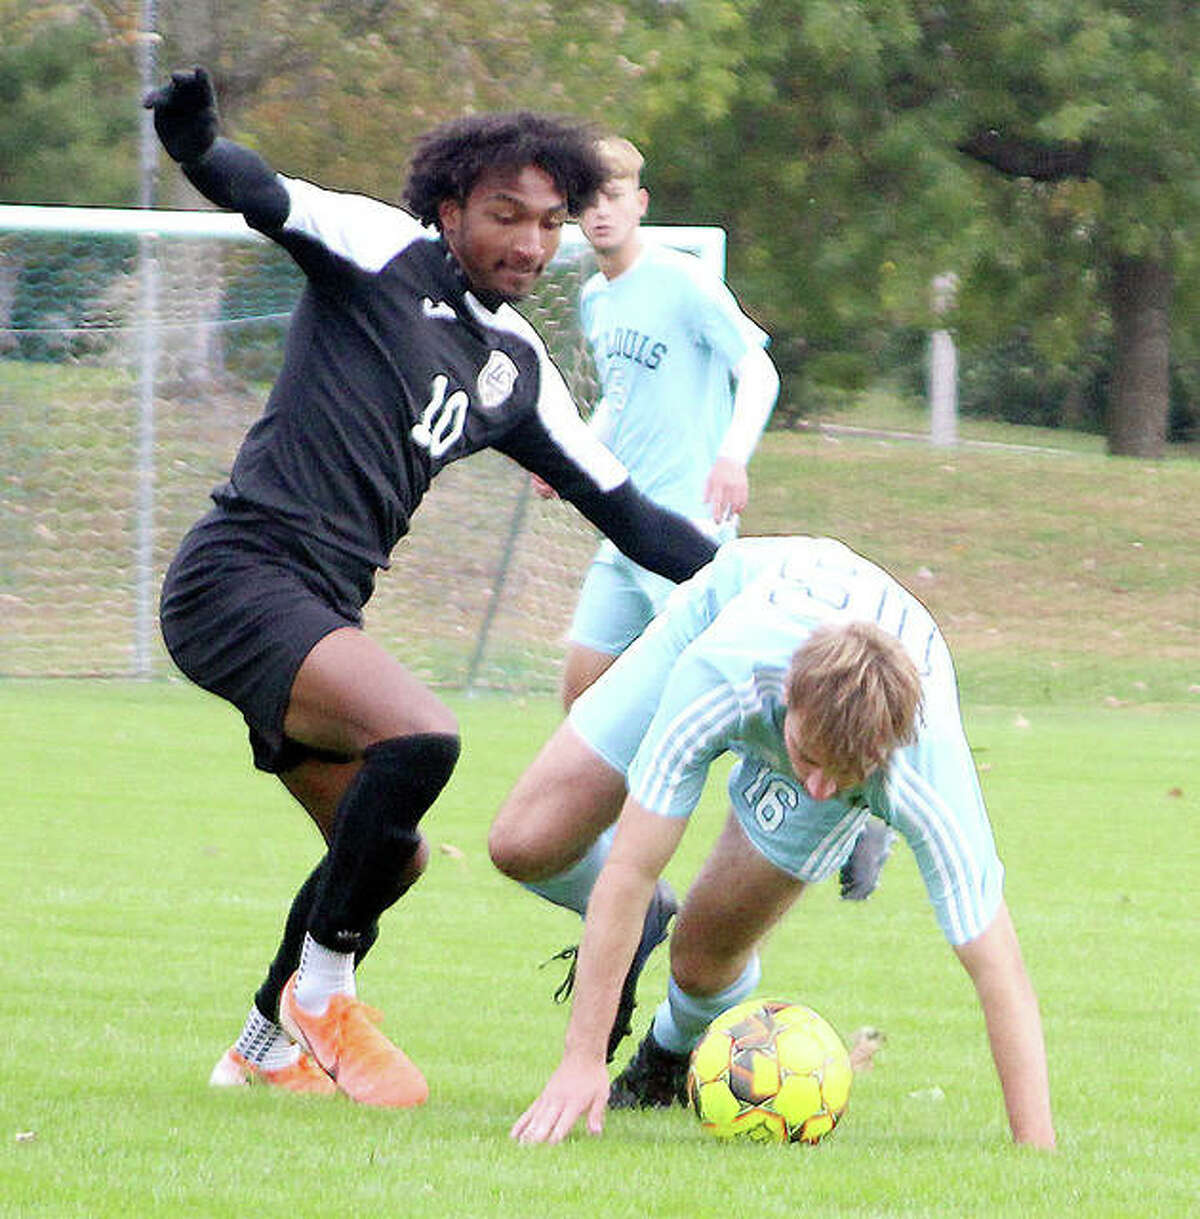 LCCC’s Reshaun Walkes, left, battles with James Grainger of STLCC Wednesday. Walkes scored the first goal in his team’s 3-1 victory.